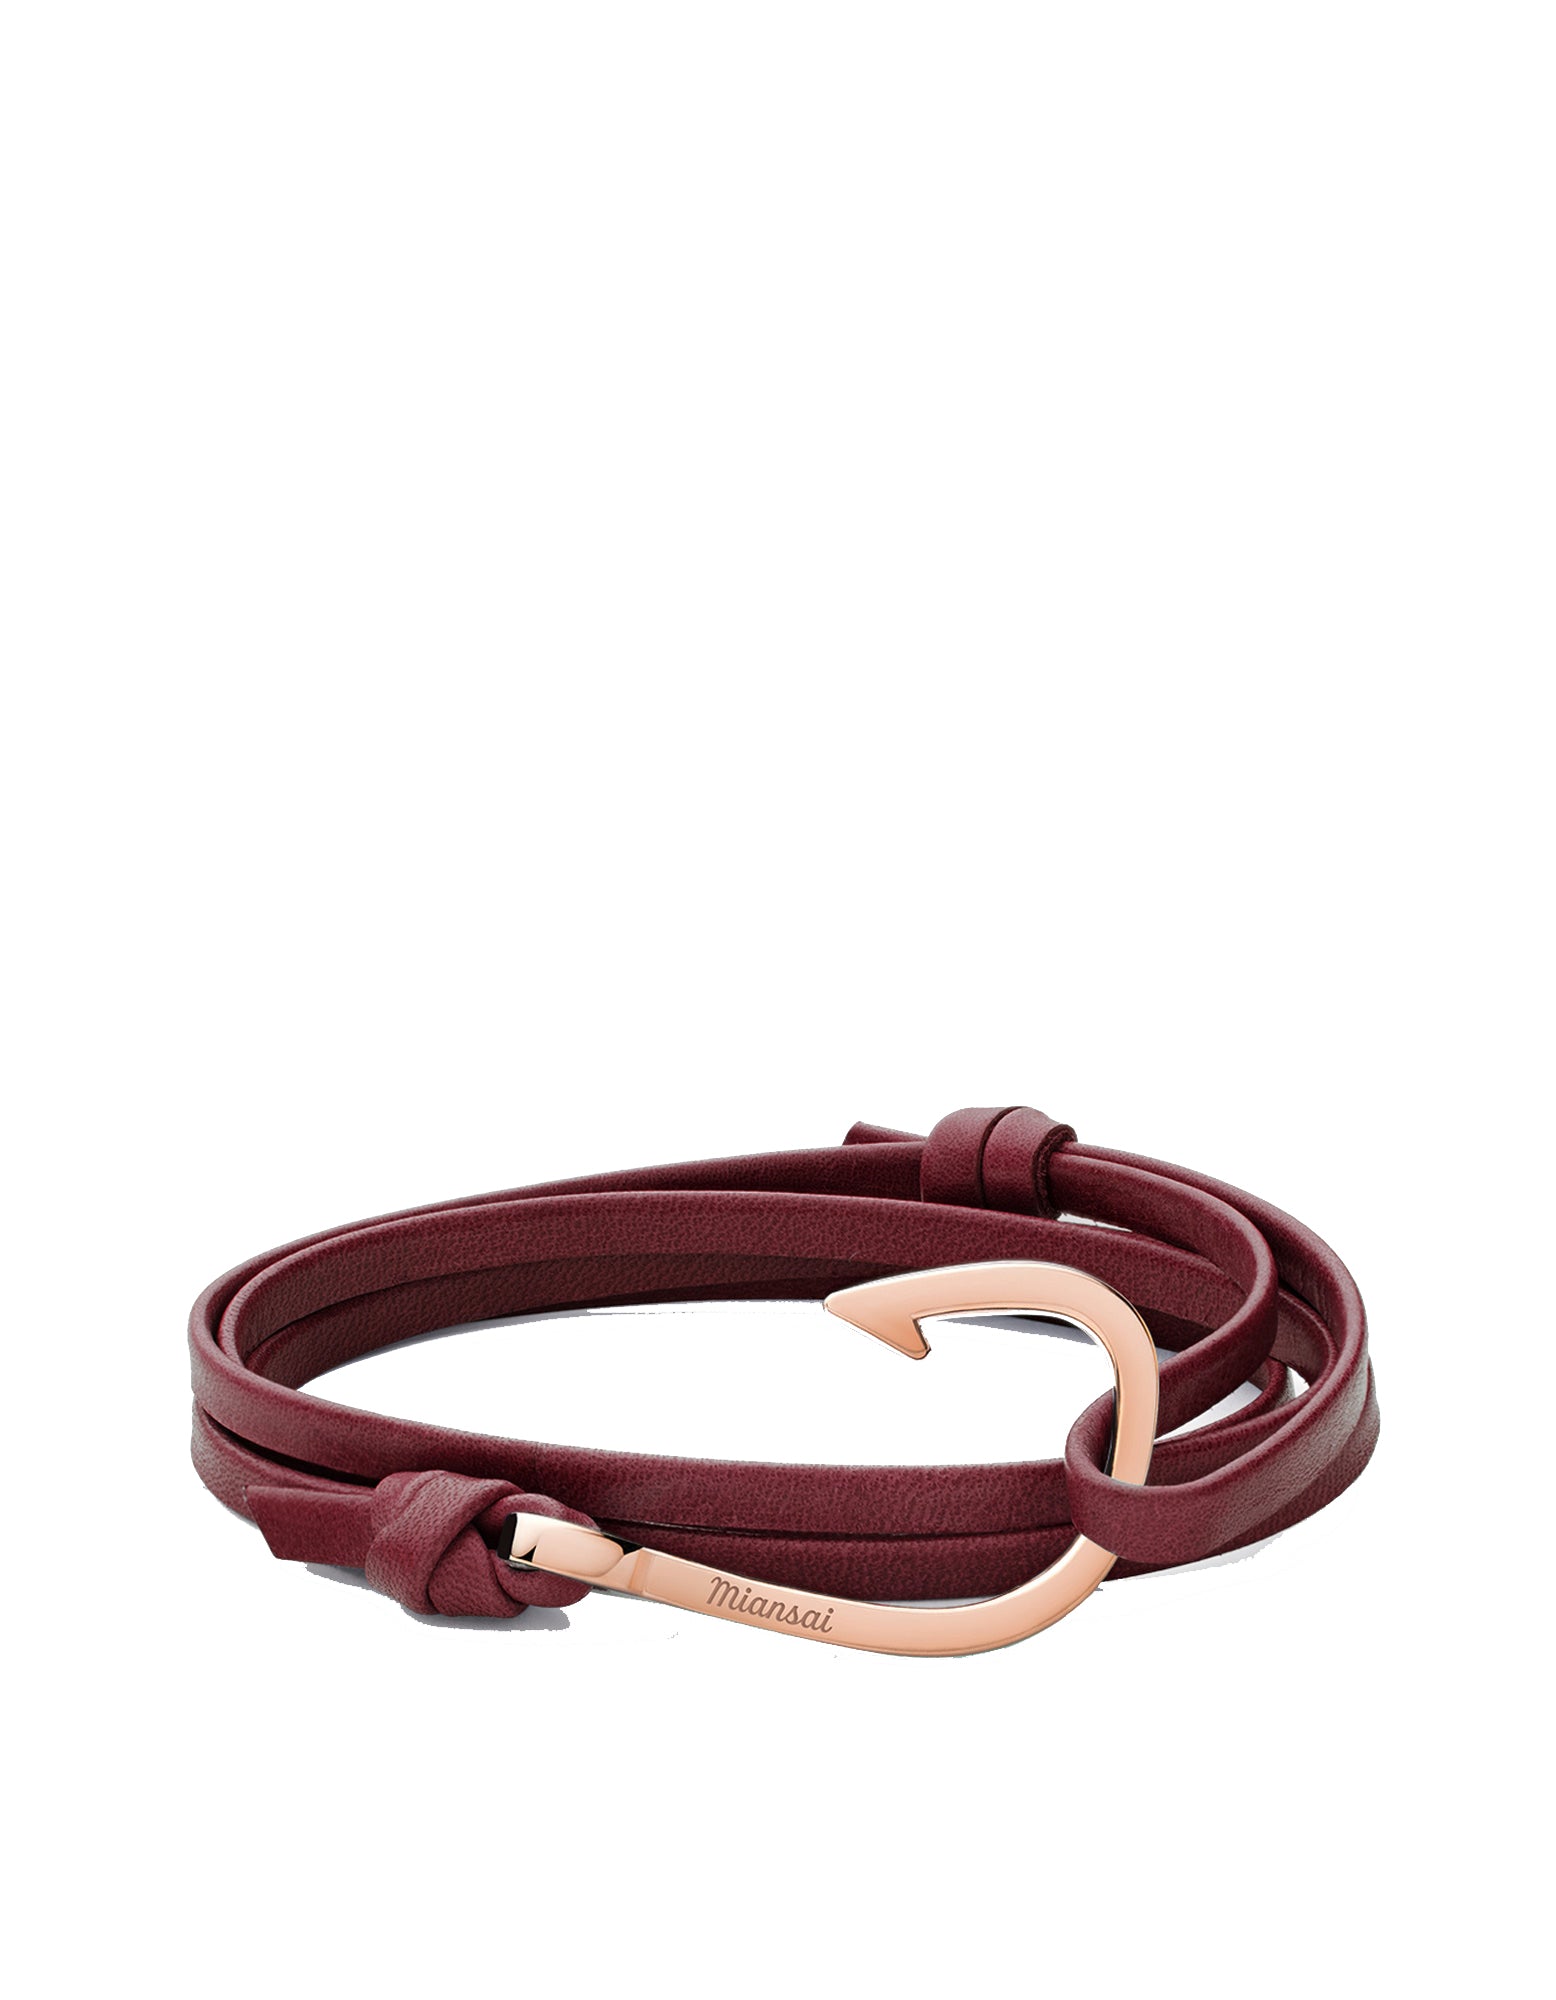 Hook on Leather Bracelet BURGUNDY/ROSE GOLD
The classic bracelet is made to impress impeccable detail to any occasion. Made with the iconic Miansai hook in rose gold plated or solid 14 karat rose gold on genuine Italian leather, it&#39;s secured to elevate your signature look. MIANSAI